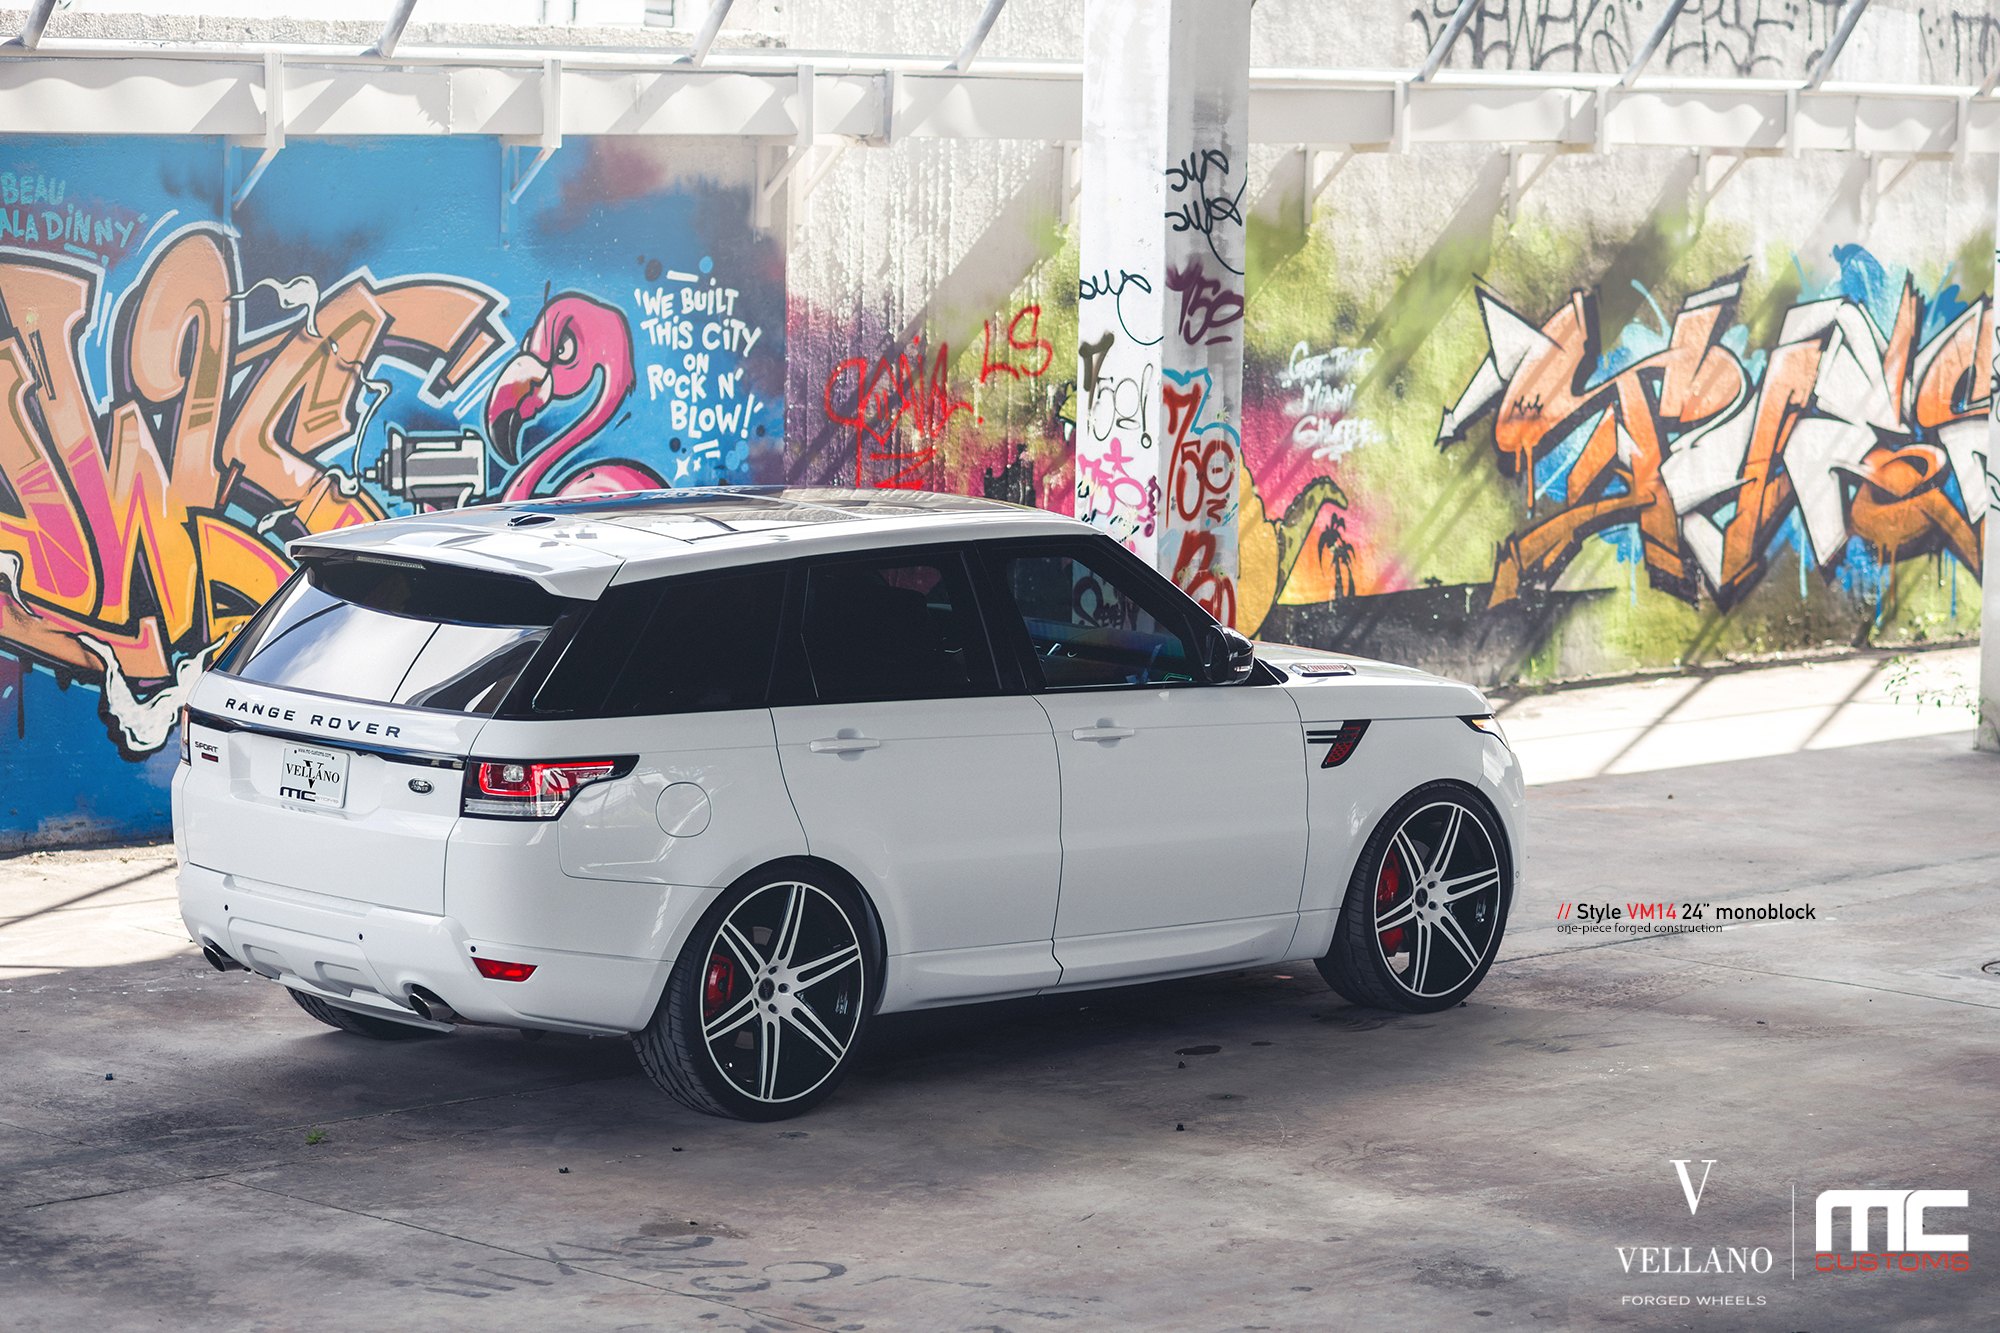 White Range Rover Sport with Red LED Taillights - Photo by Vellano